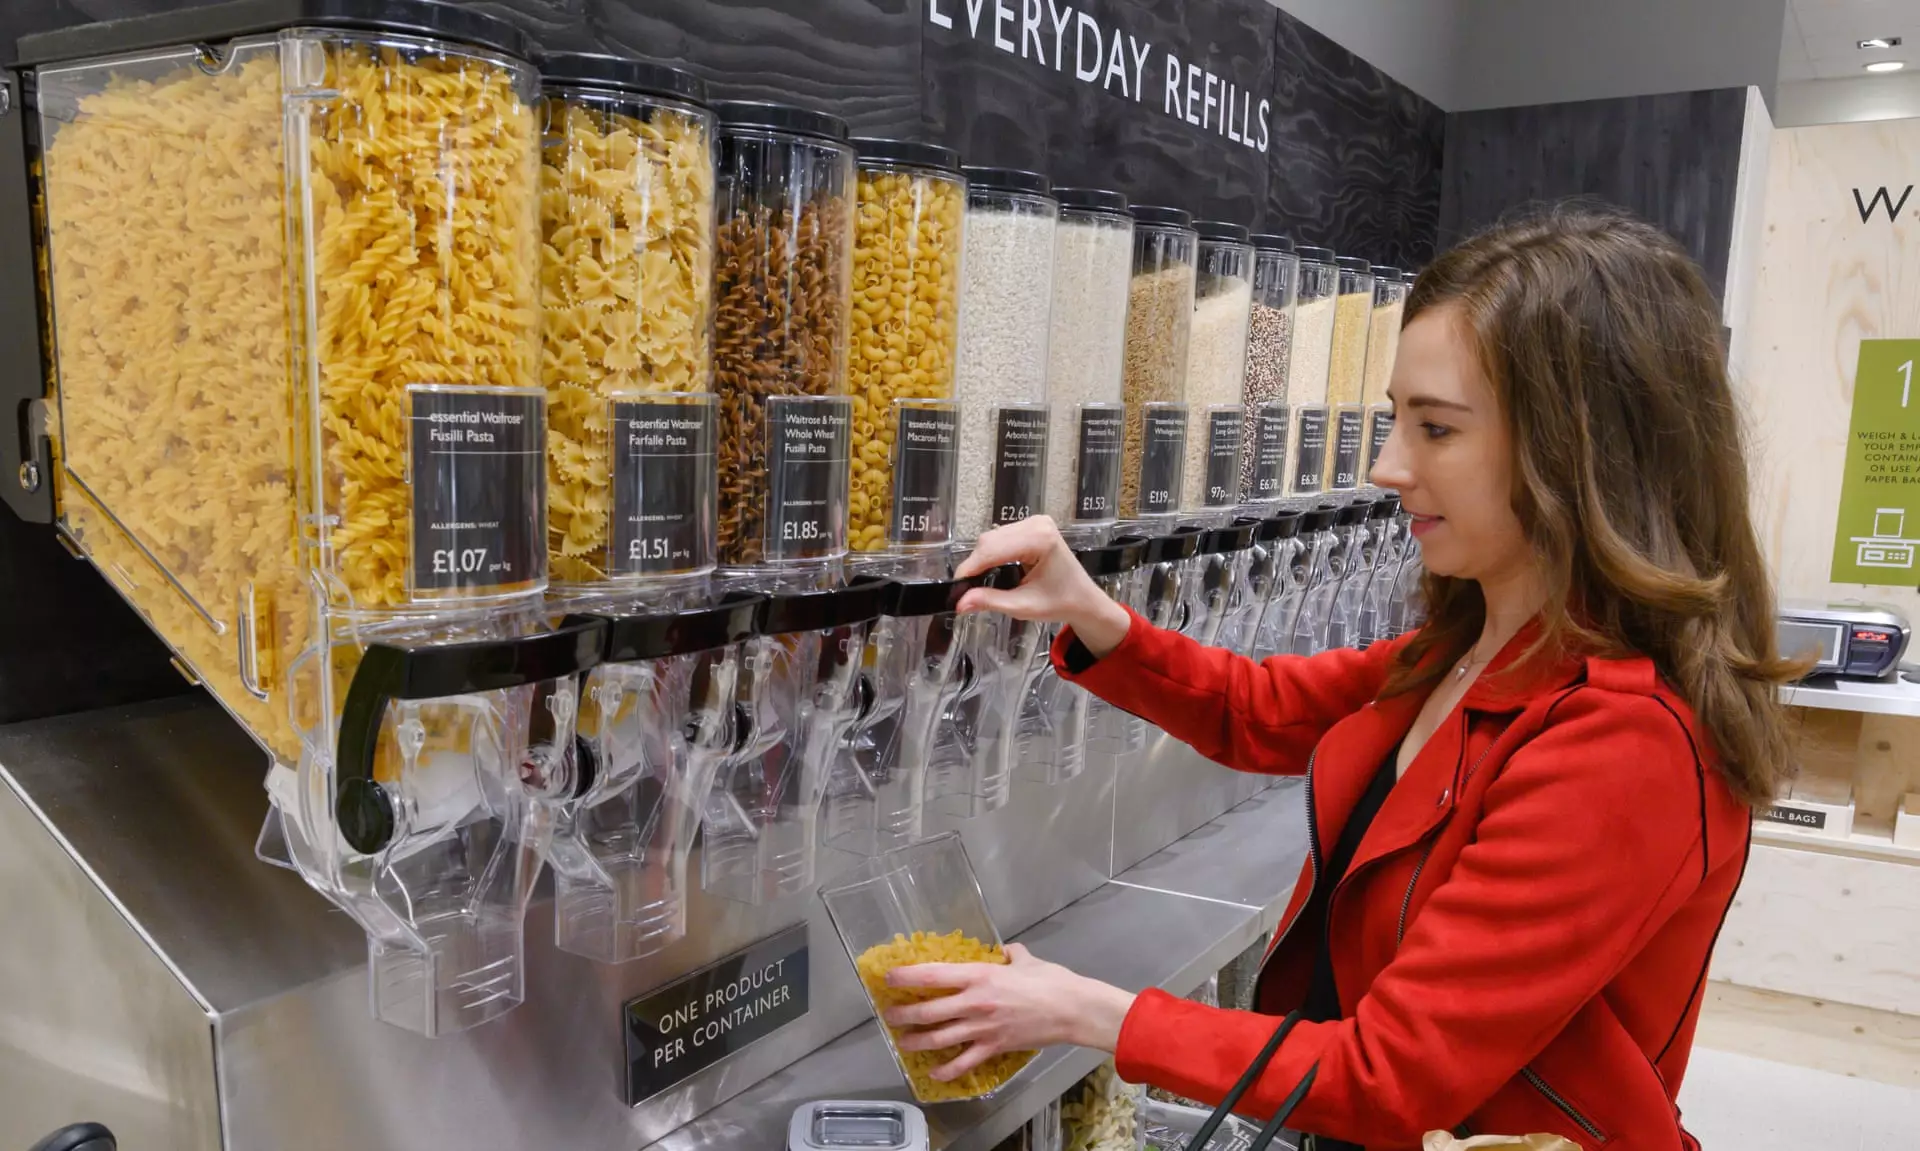 The premium supermarket brand has started a trial allowing customers to bring in their own containers.